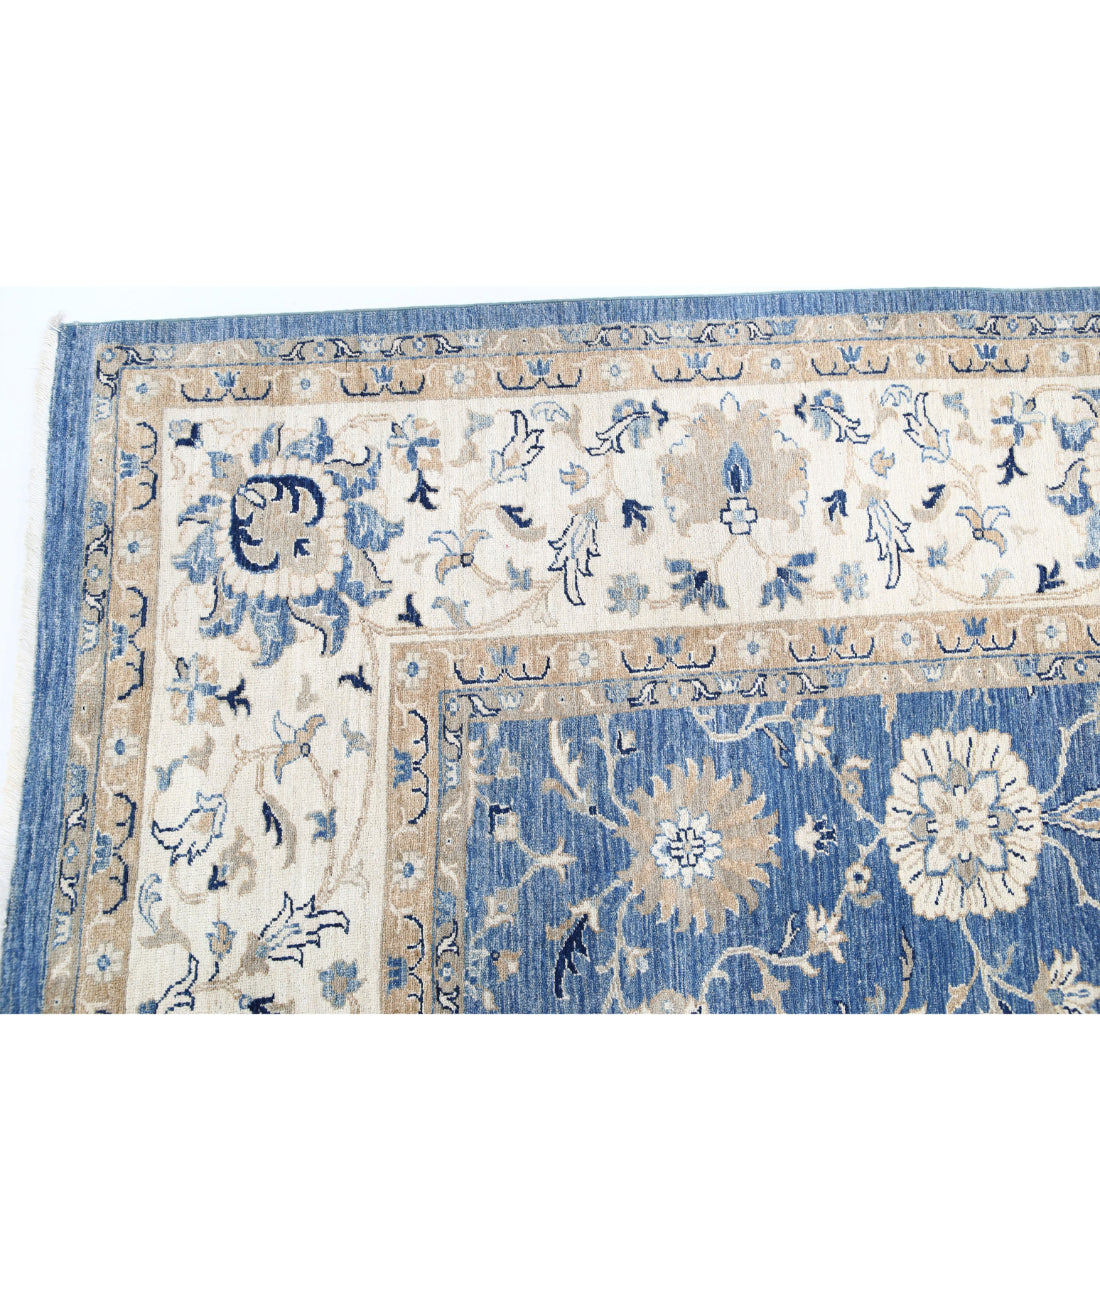 Ziegler 9'11'' X 20'8'' Hand-Knotted Wool Rug 9'11'' x 20'8'' (298 X 620) / Blue / Ivory